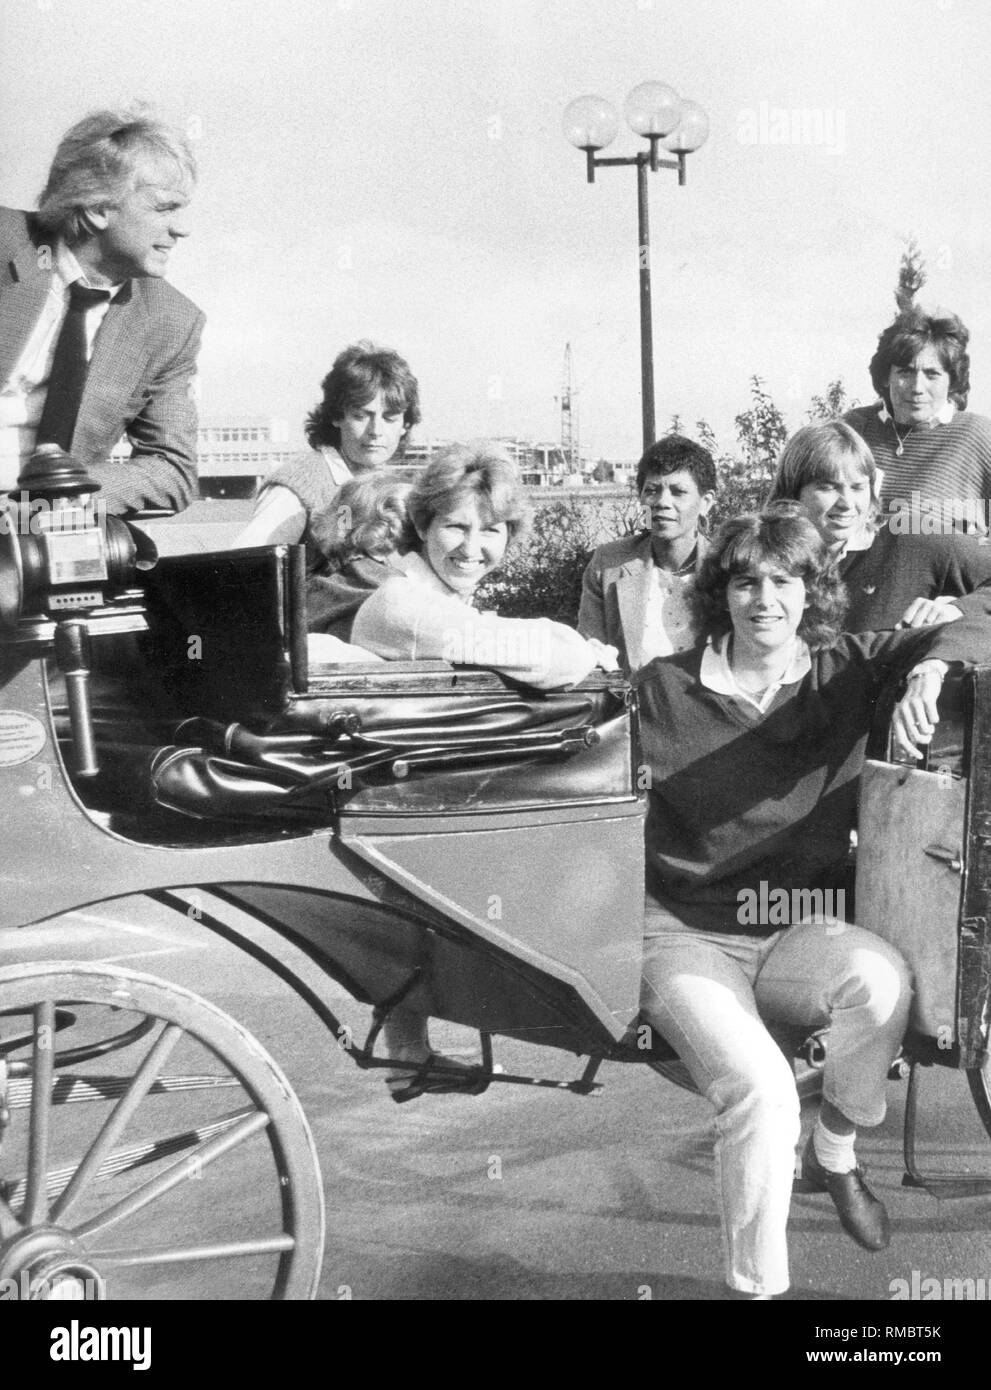 Sport moderator Dieter Kuerten in a carriage full of athletes on the way to a symposium on 'Woman in Sport', from left to right: Dieter Kuerten, Ingrid Mickler-Becker, Annegret Richter, Wilma Rudolph, Klaudia Kohde, Eva Pfaff and Rosi Mittermaier. Stock Photo